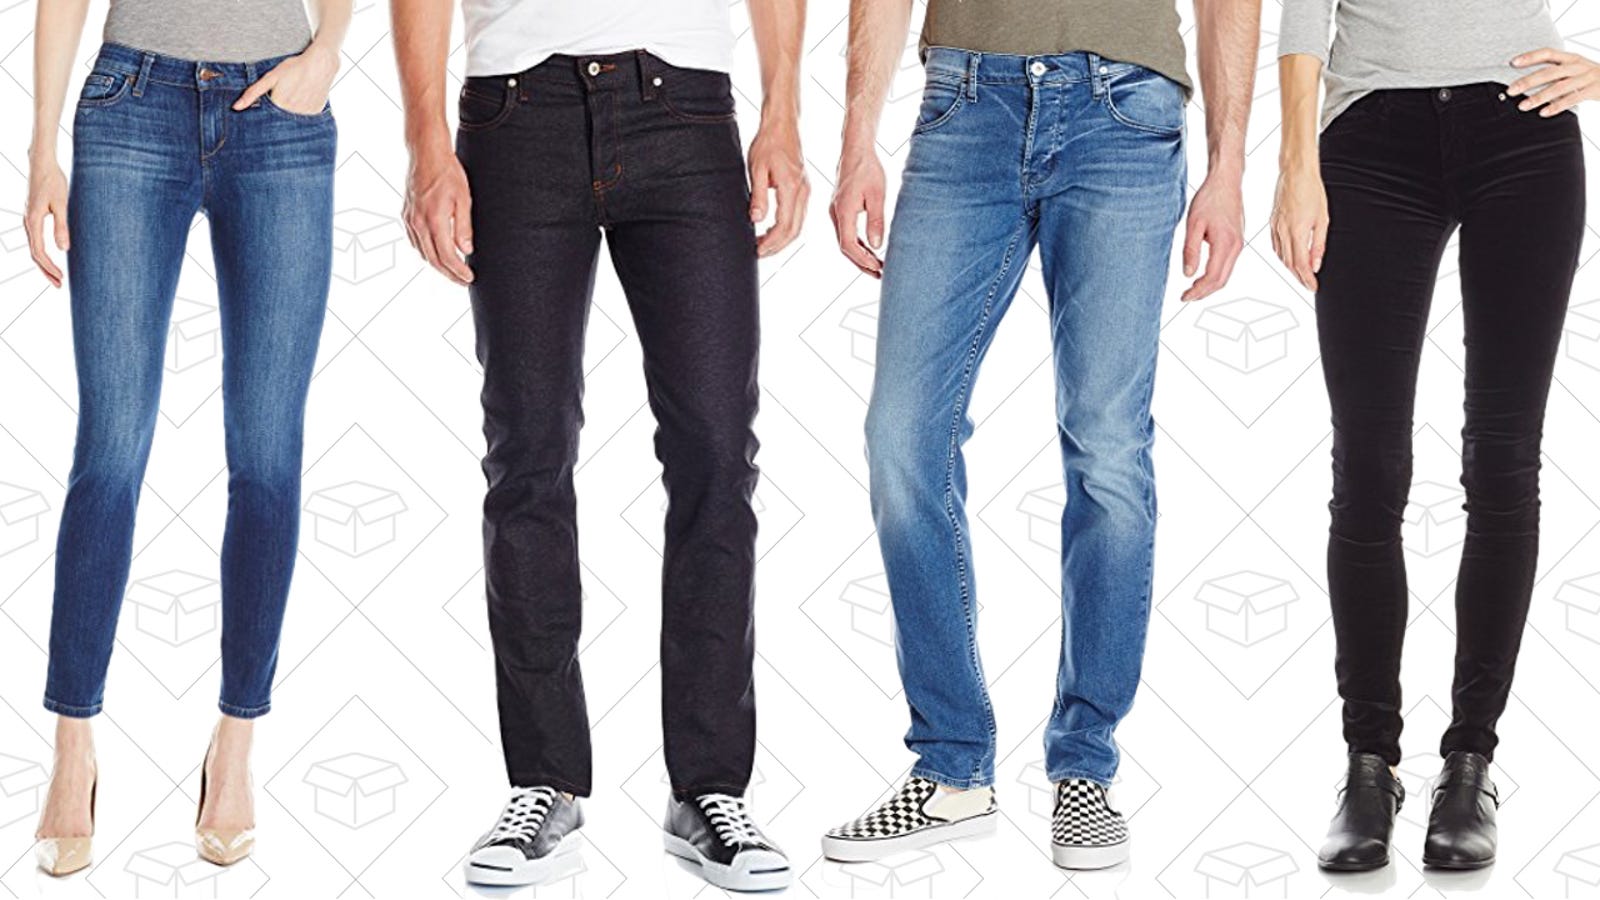 Put Some New Pants on With Amazon's One-Day Denim Sale